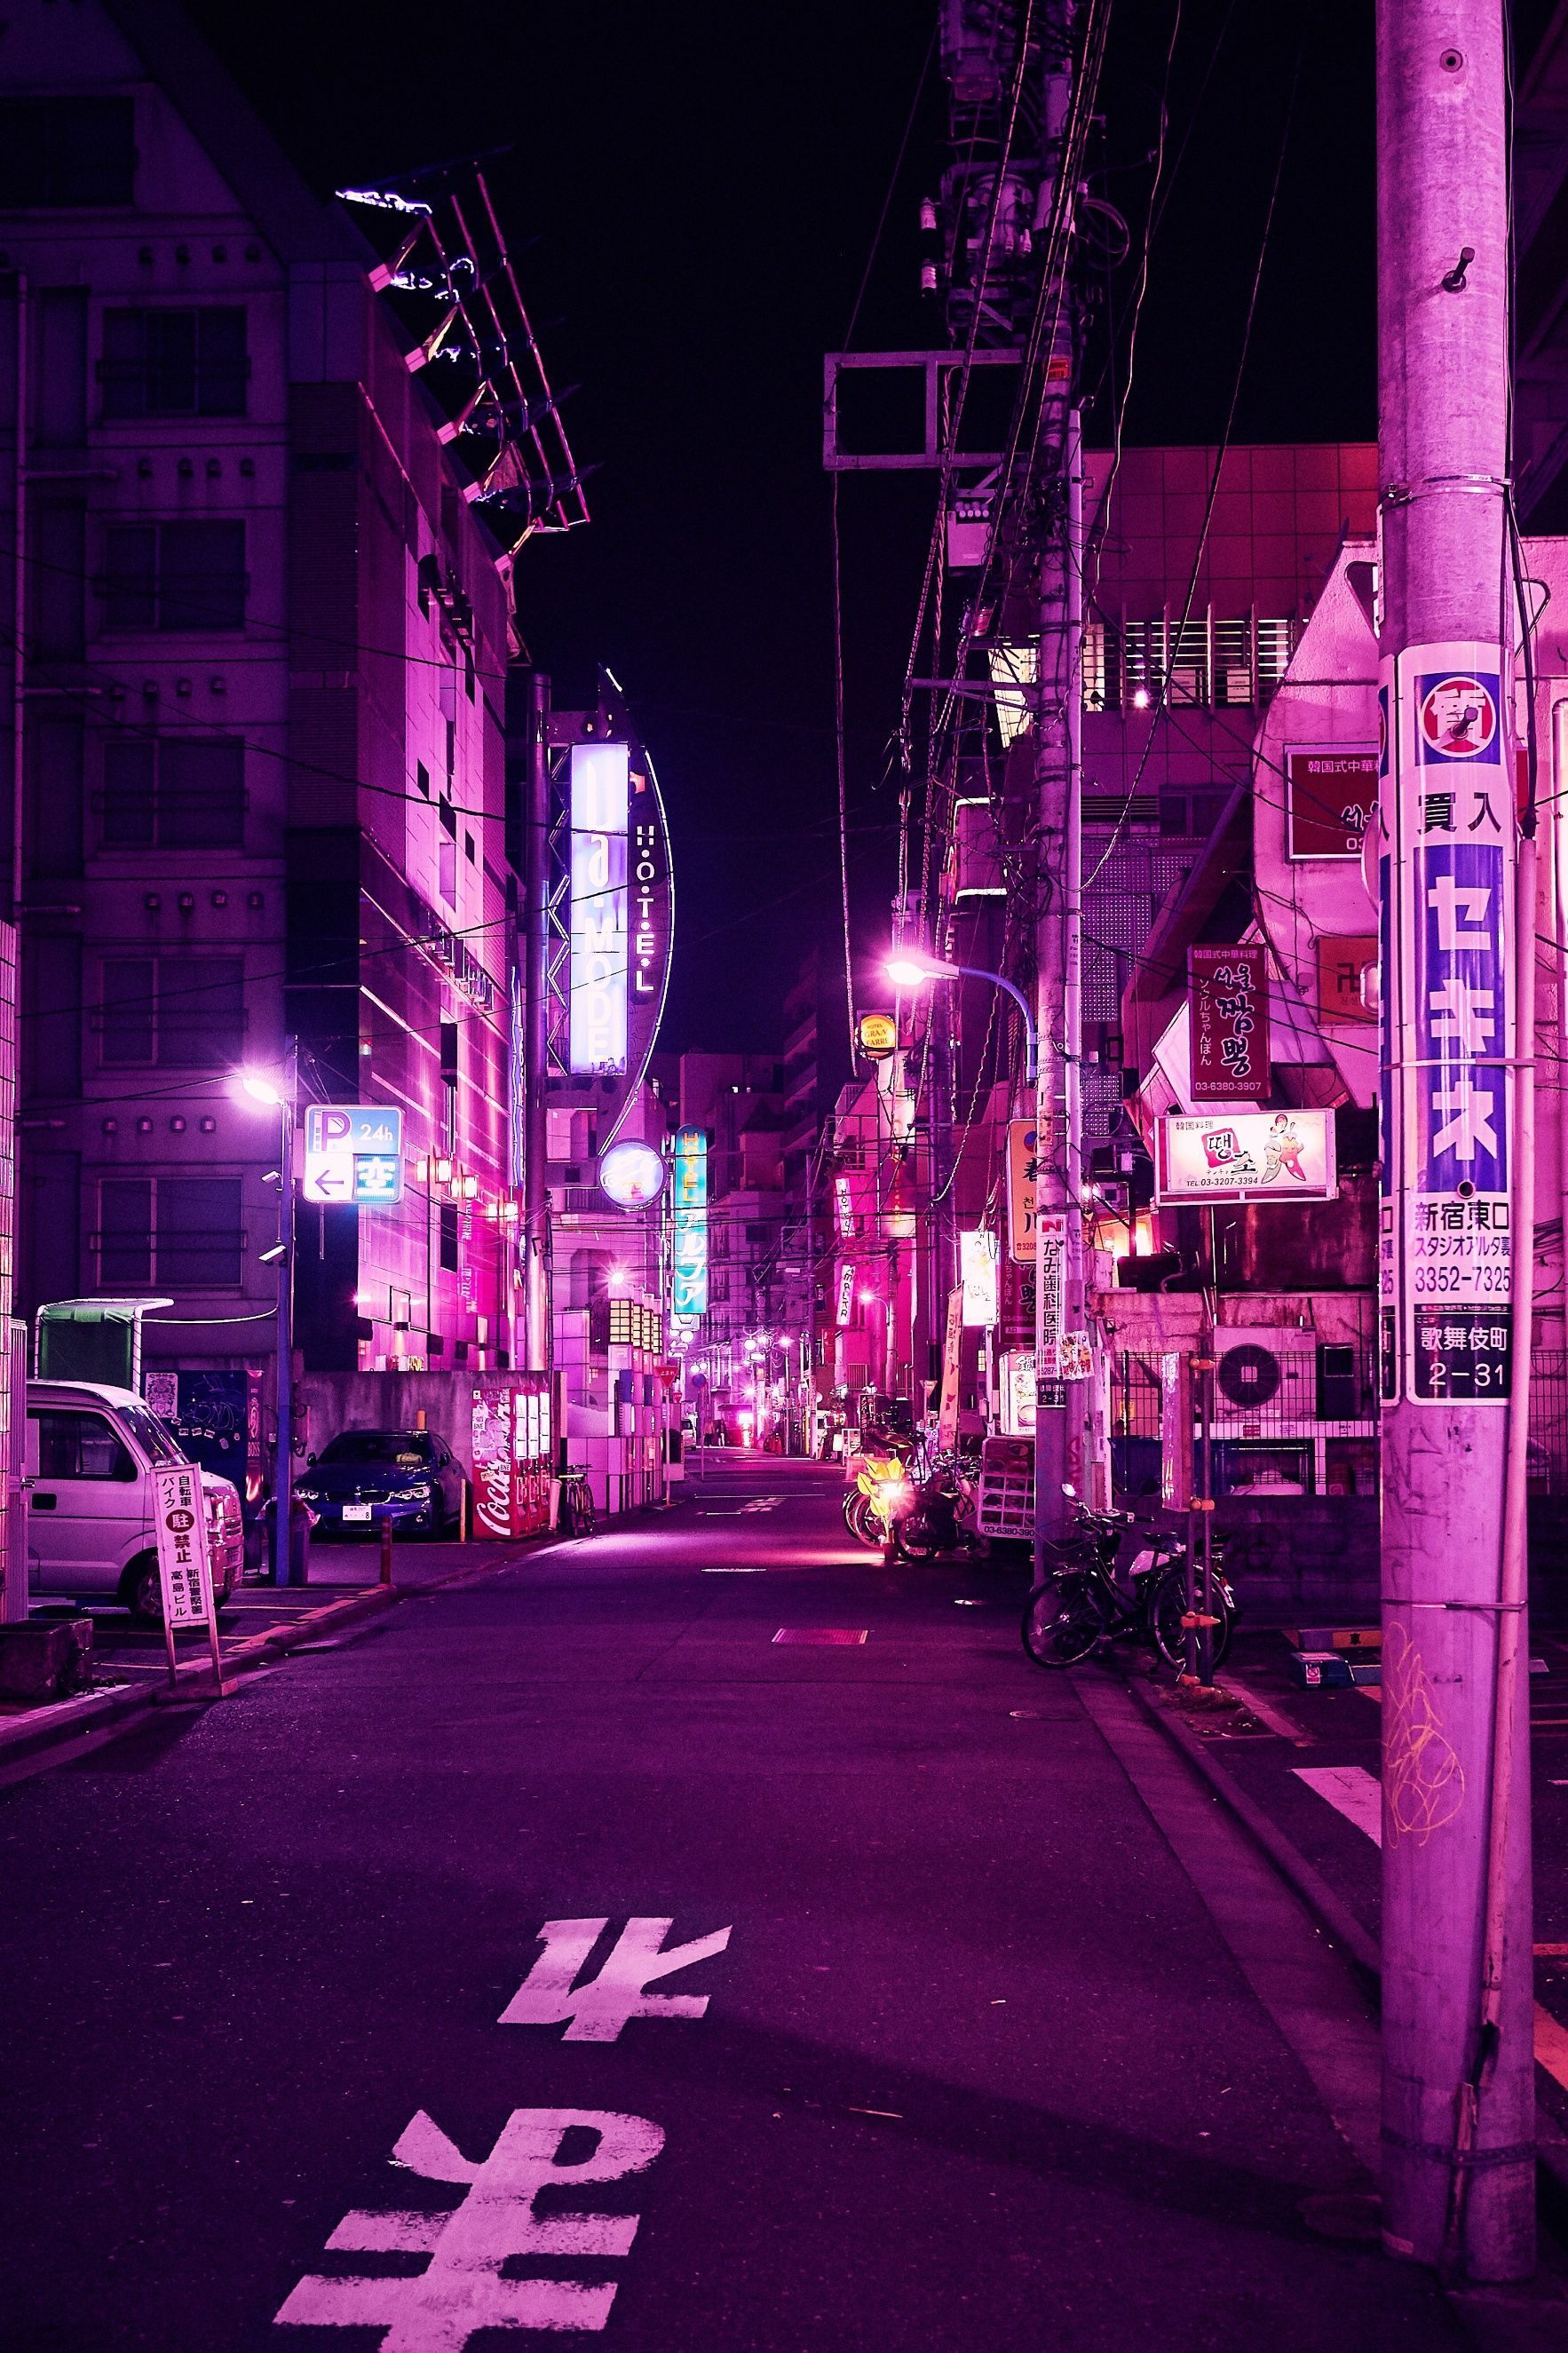 A city street at night with neon lights - Tokyo, Japan